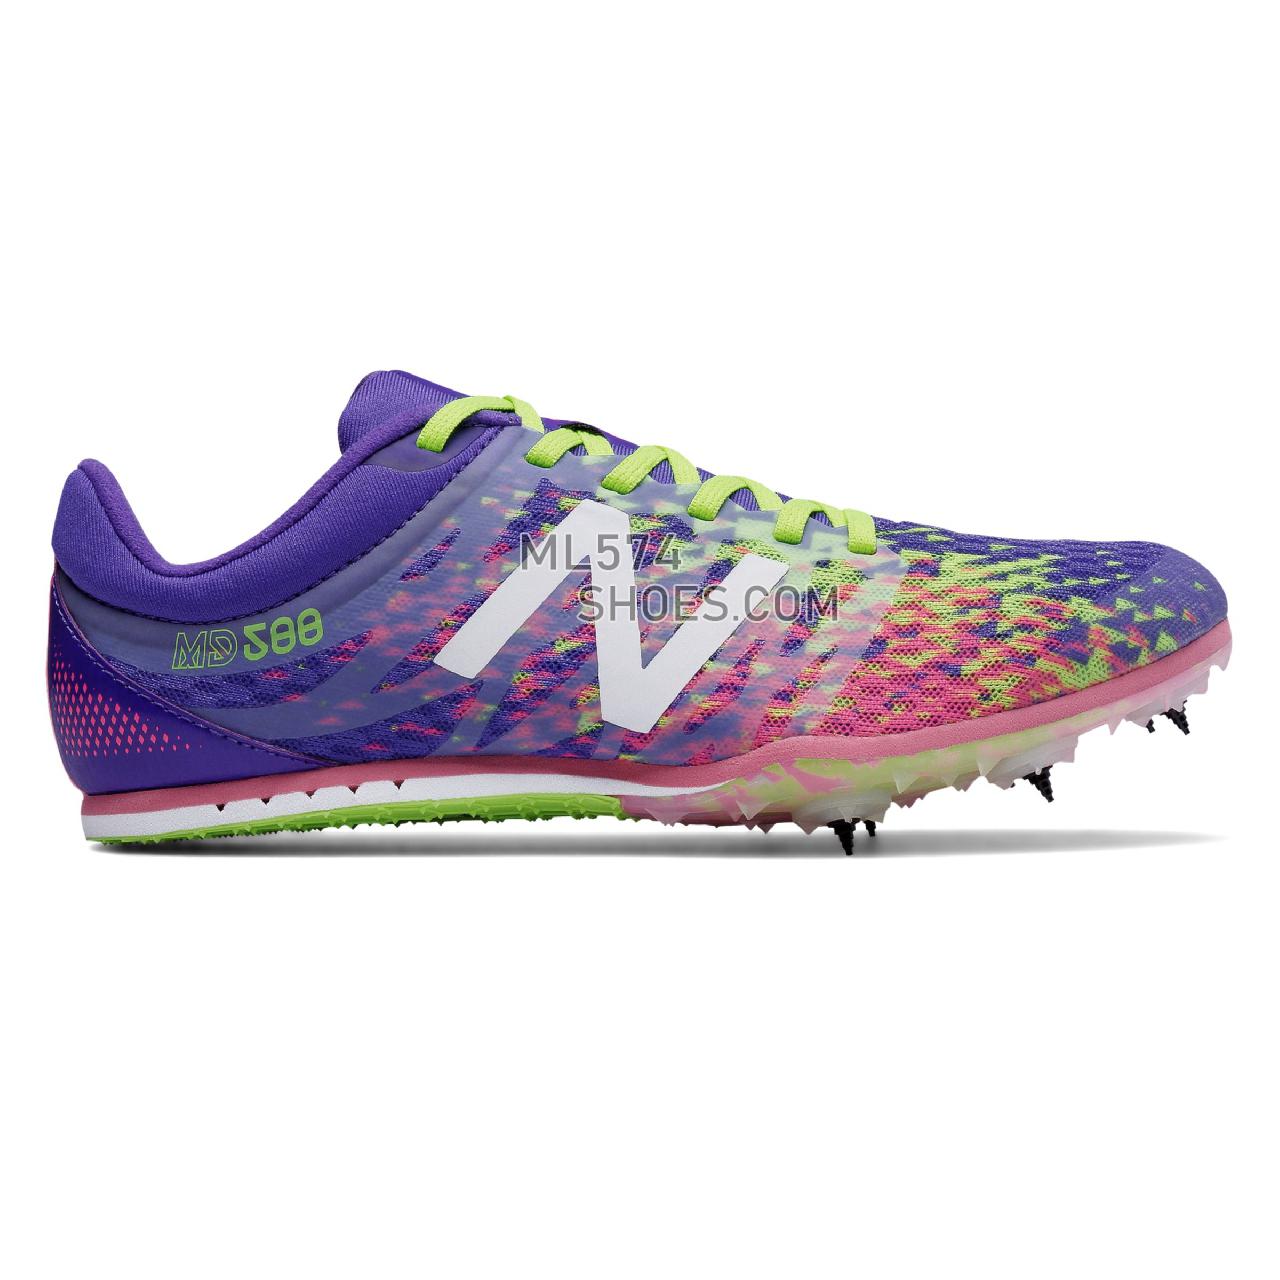 New Balance MD500v5 Spike - Women's Md500V5 Spike - Running - Purple with Firefly and Guava - WMD500P5